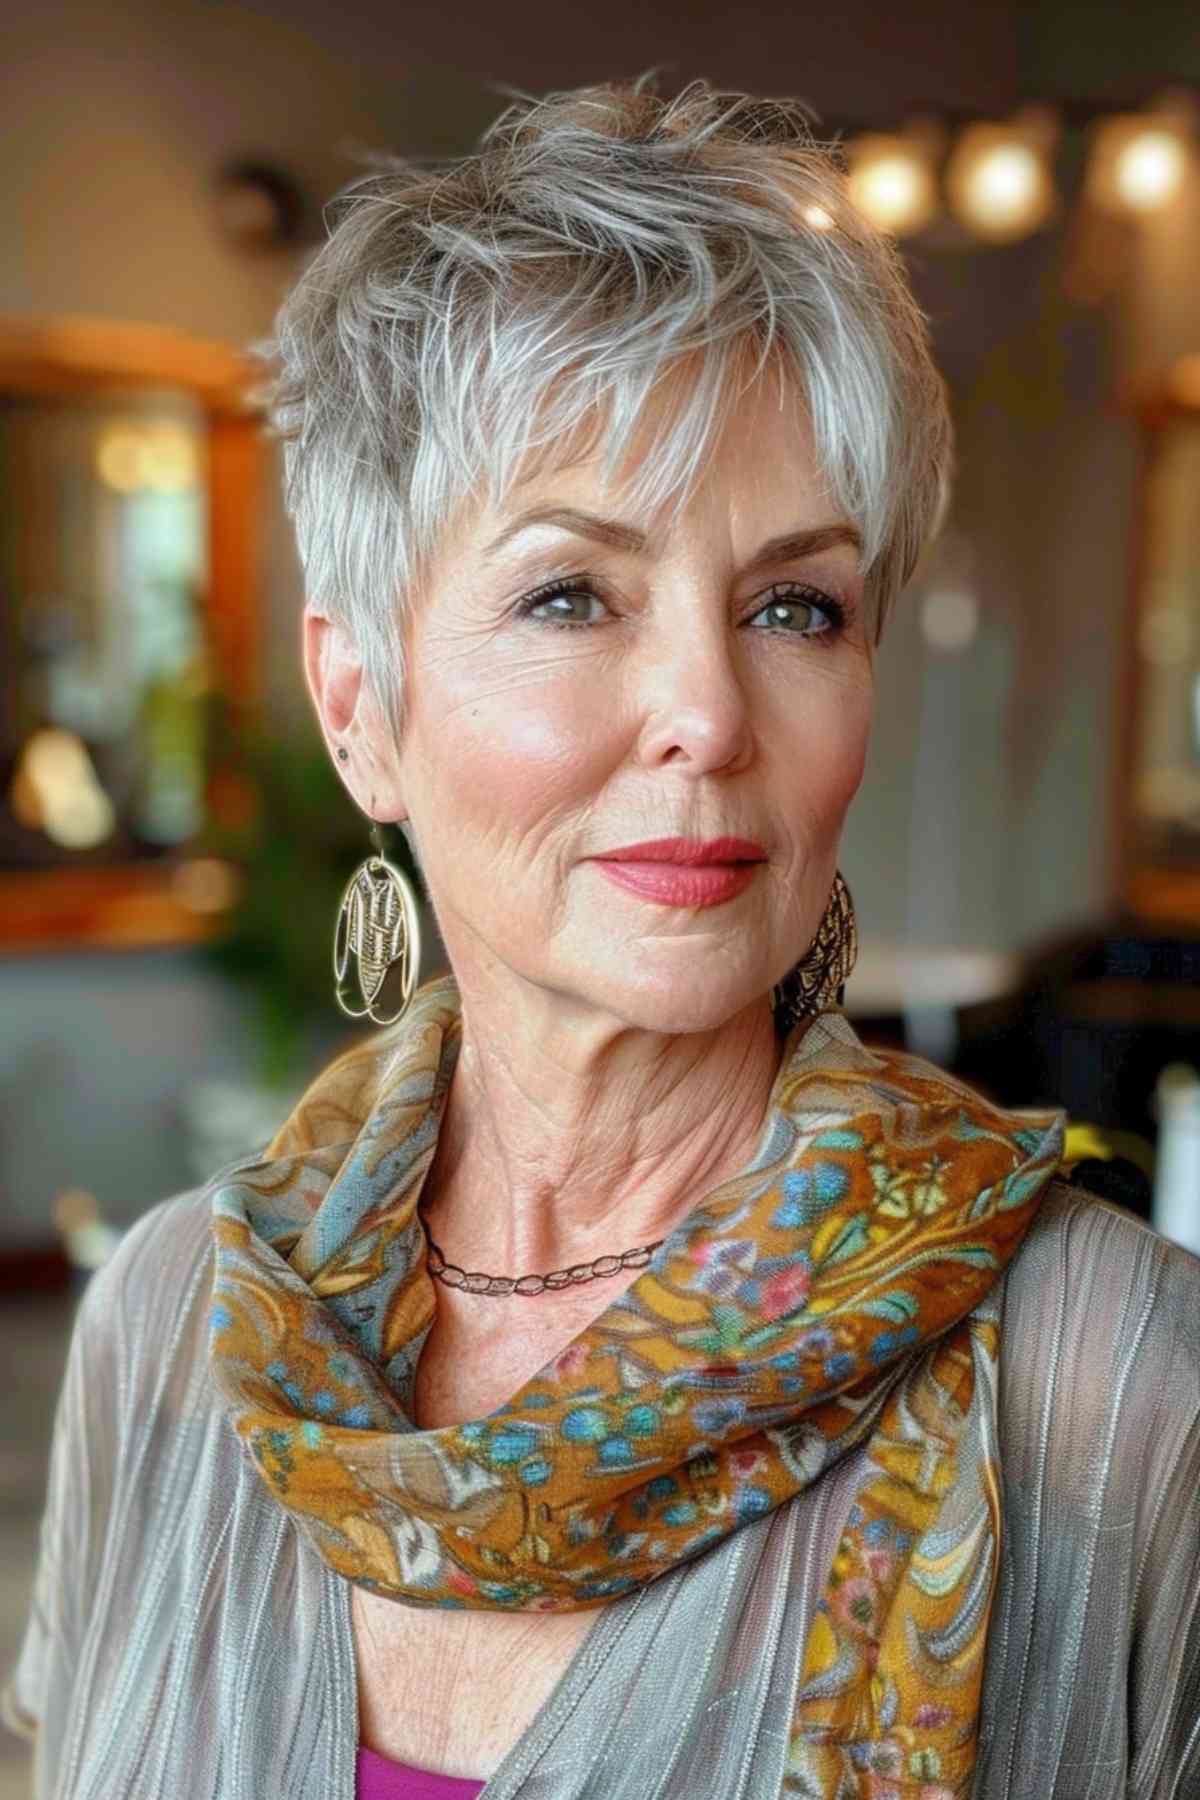 Textured pixie cut on a woman over 50, featuring silver hair styled to enhance natural volume and facial features.